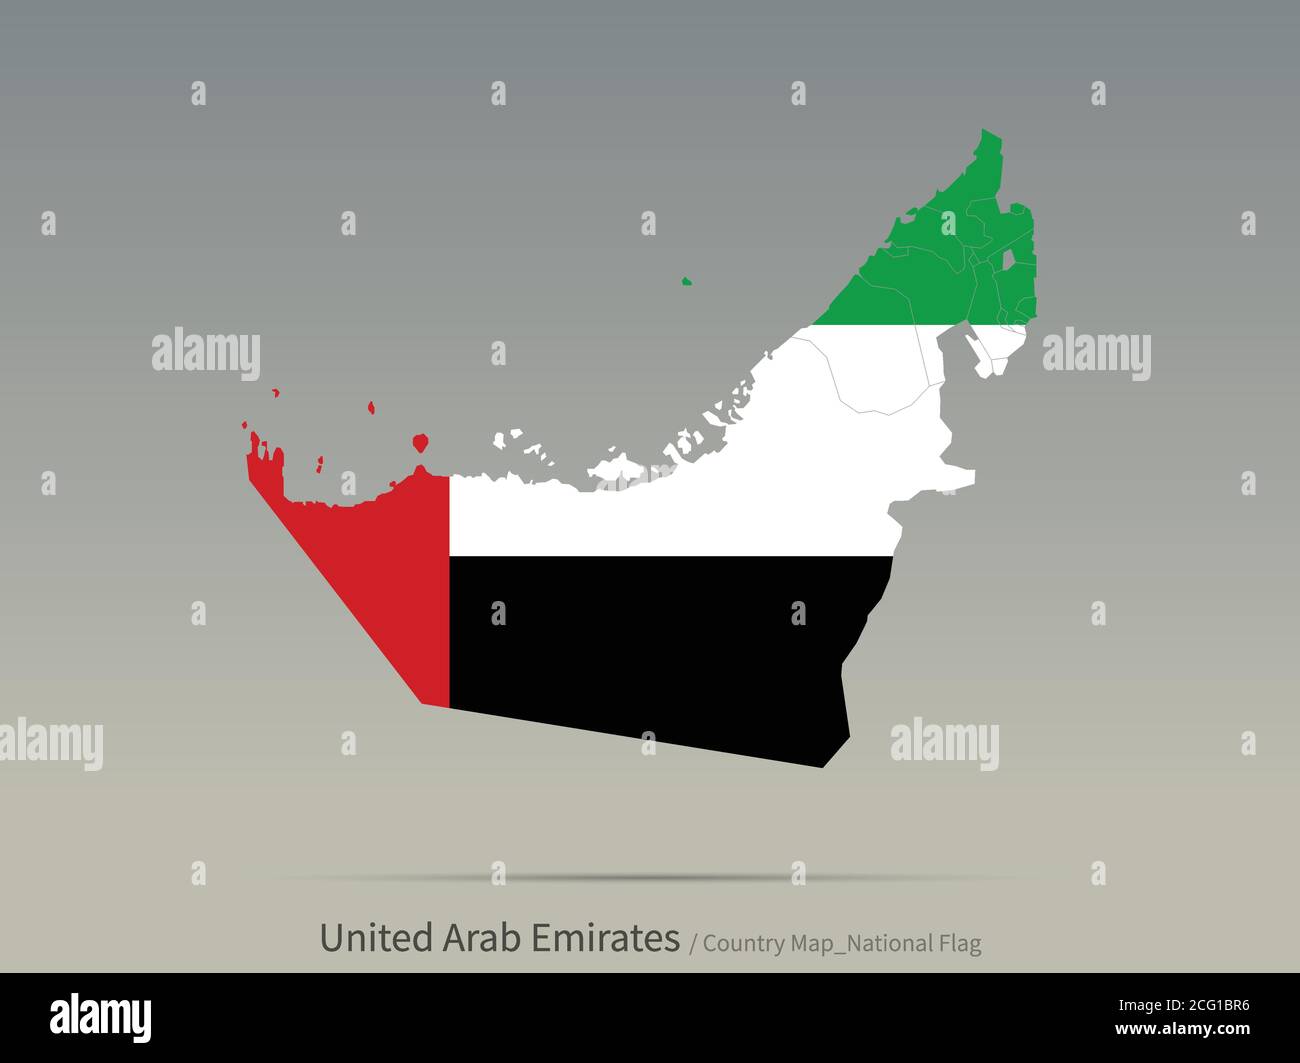 UAE Flag Isolated on Map. Middle East countries map and flag. Stock Vector